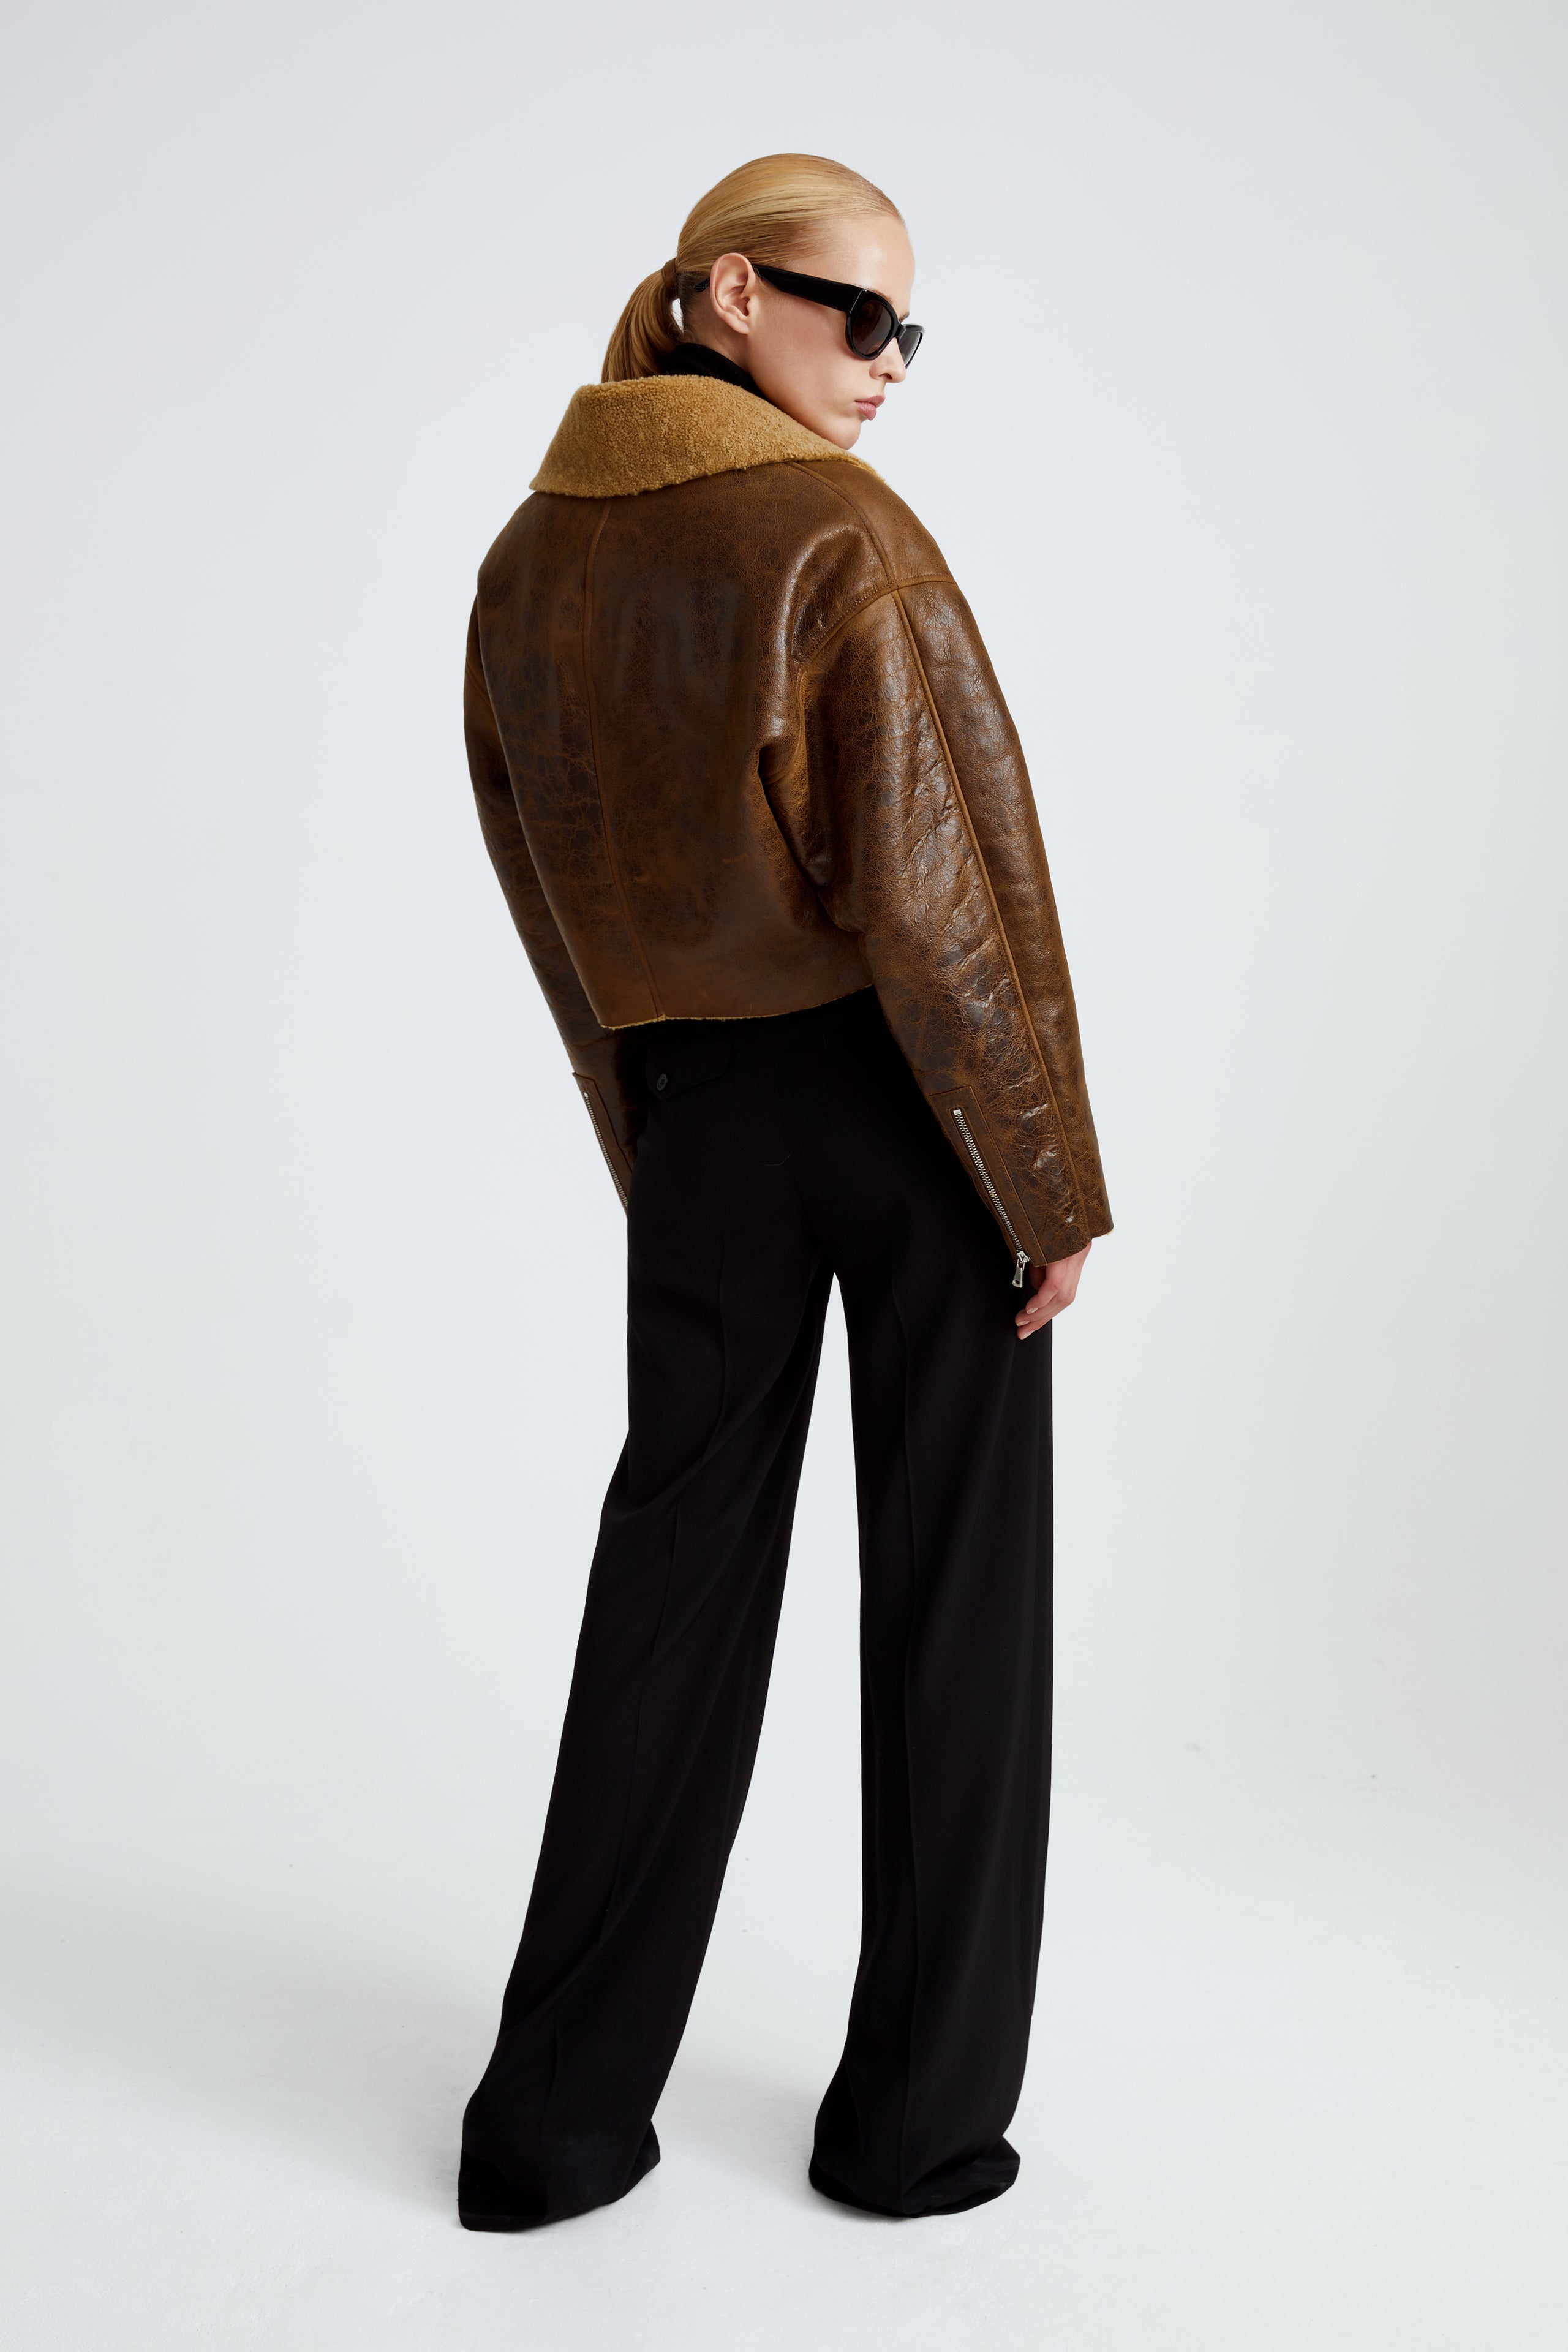 Model is wearing the Colorado Brown Caramel Relaxed Shearling Jacket Back